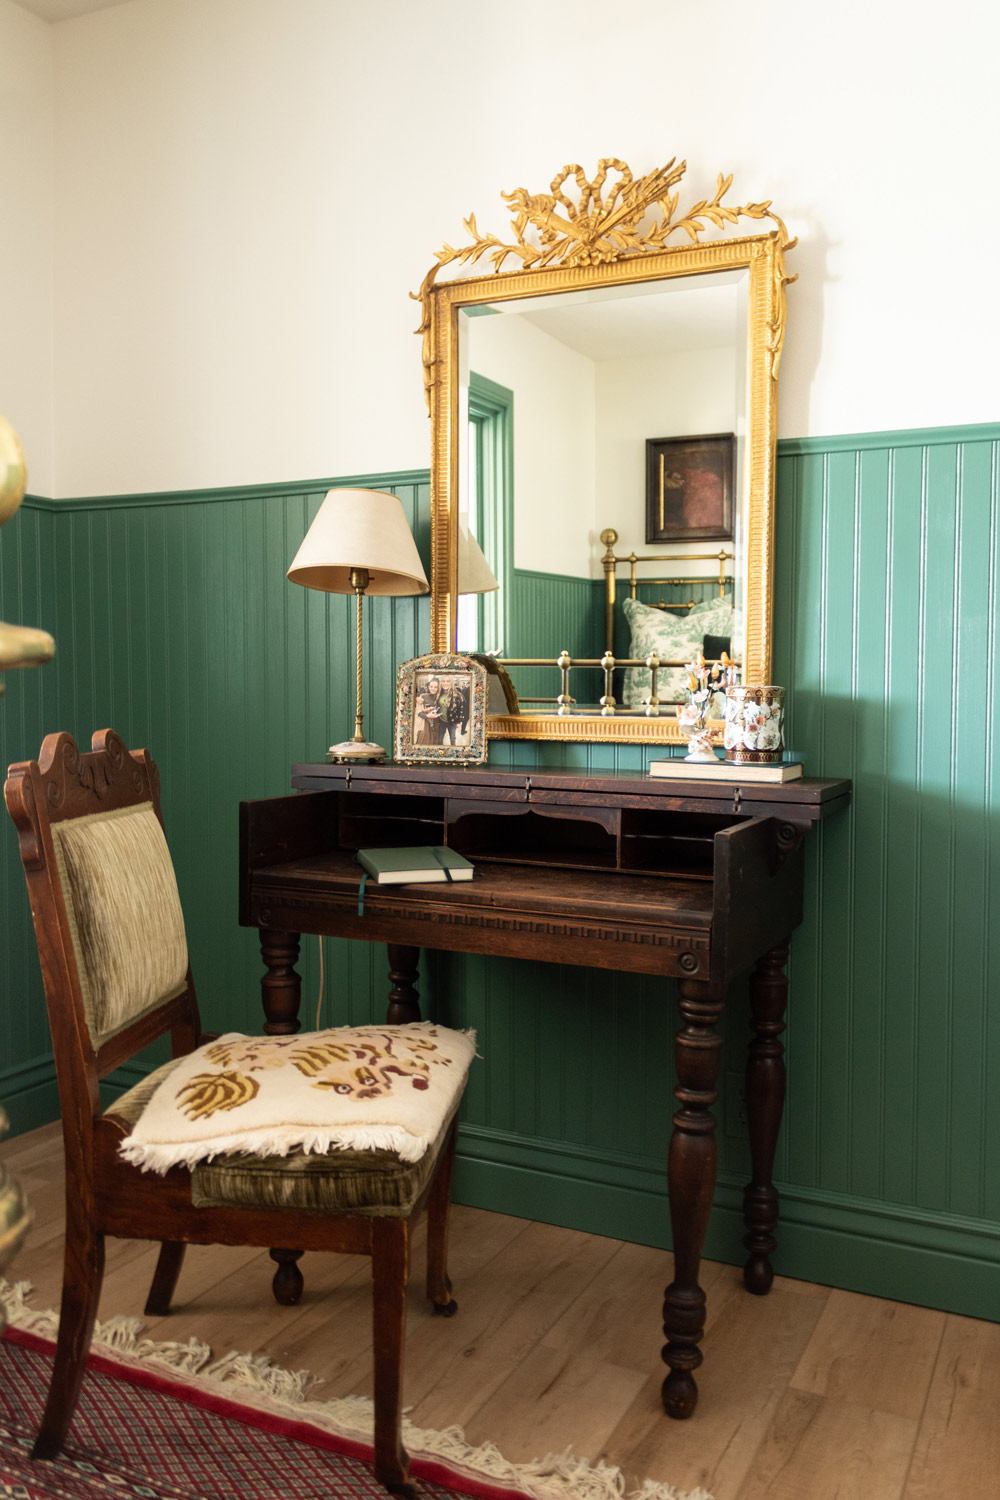 A wooden desk and chair with a gold framed mirror.